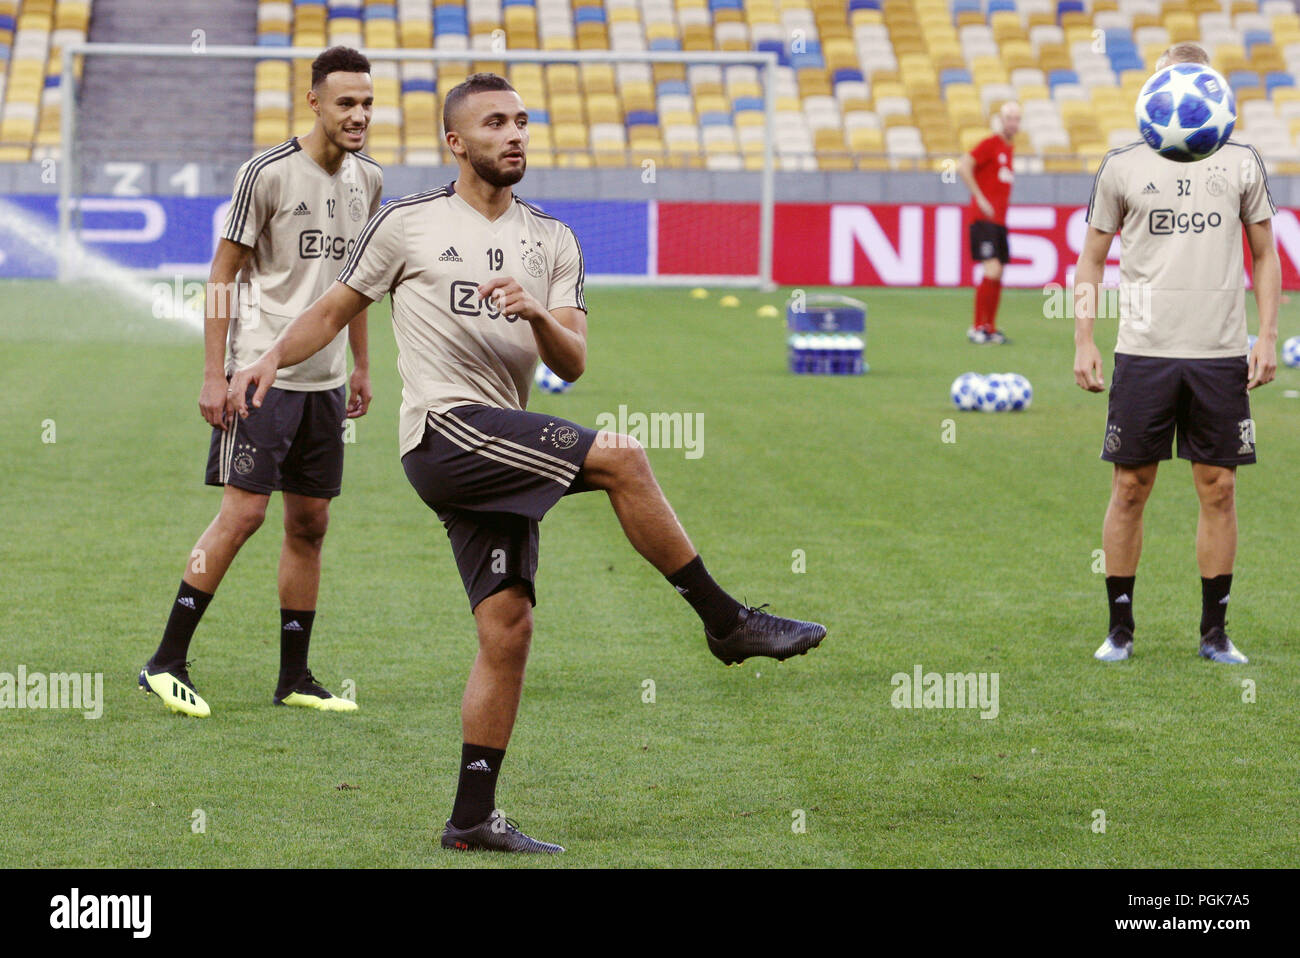 Kiev, Ukraine. 27th Aug, 2018. Ajax's ZAKARIA LABYAD (2-L) in action during  a training session of Ajax players at the Olimpiyskiy stadium in Kiev,  Ukraine, on 27 August 2018. Ajax will face